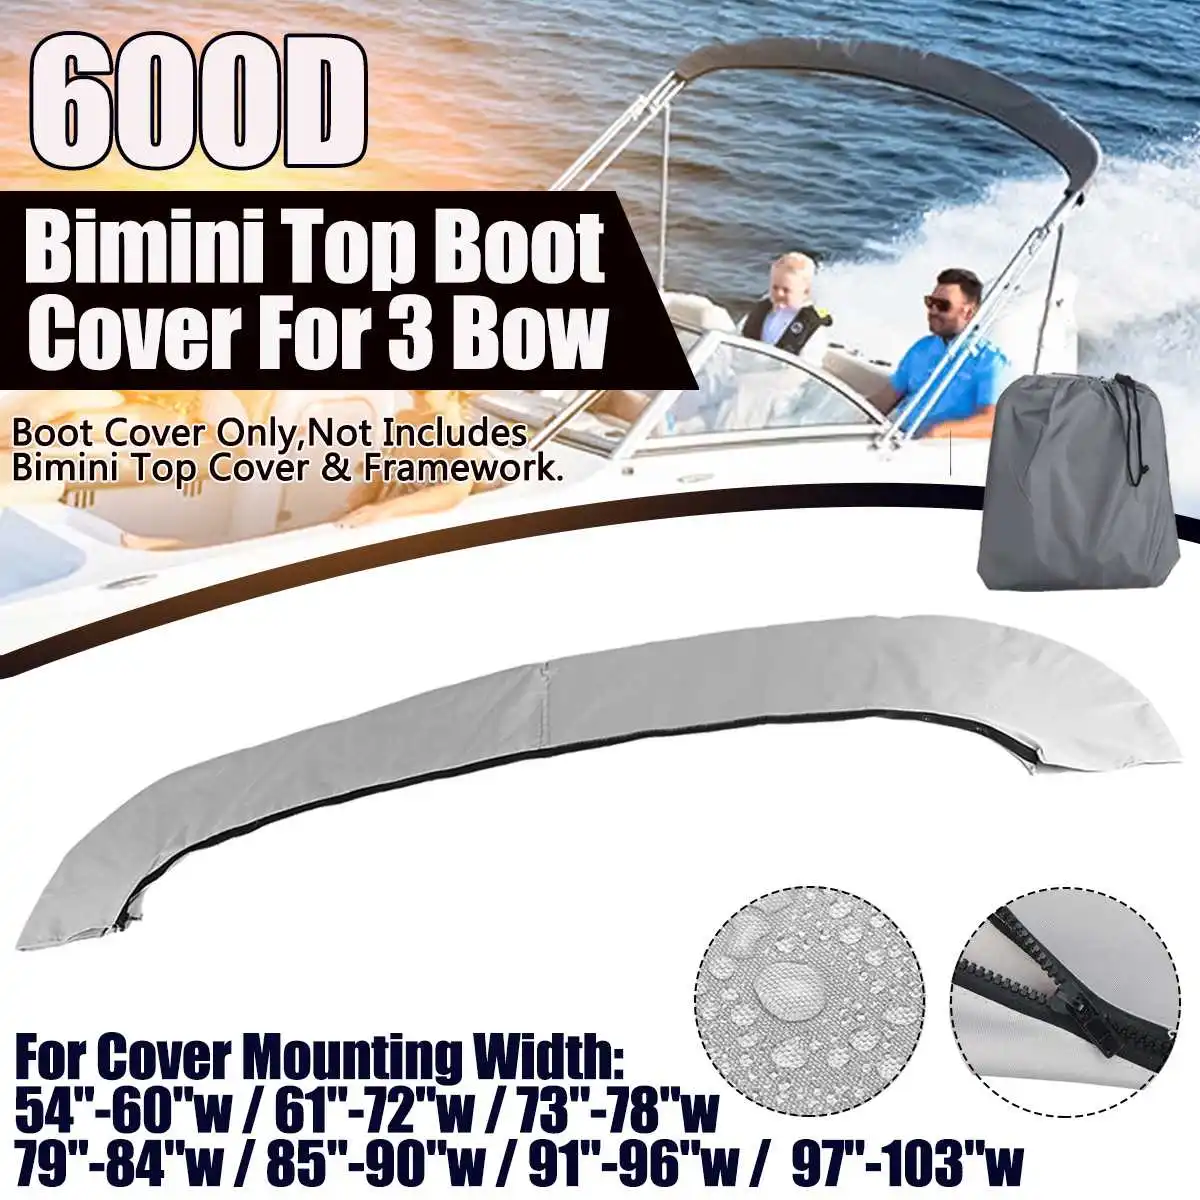 600D 3 Bow Bimini Top Boot Cover No Frame Waterproof Yacht Boat Cover with Zipper Anti UV Dustproof Cover Marine Accessories